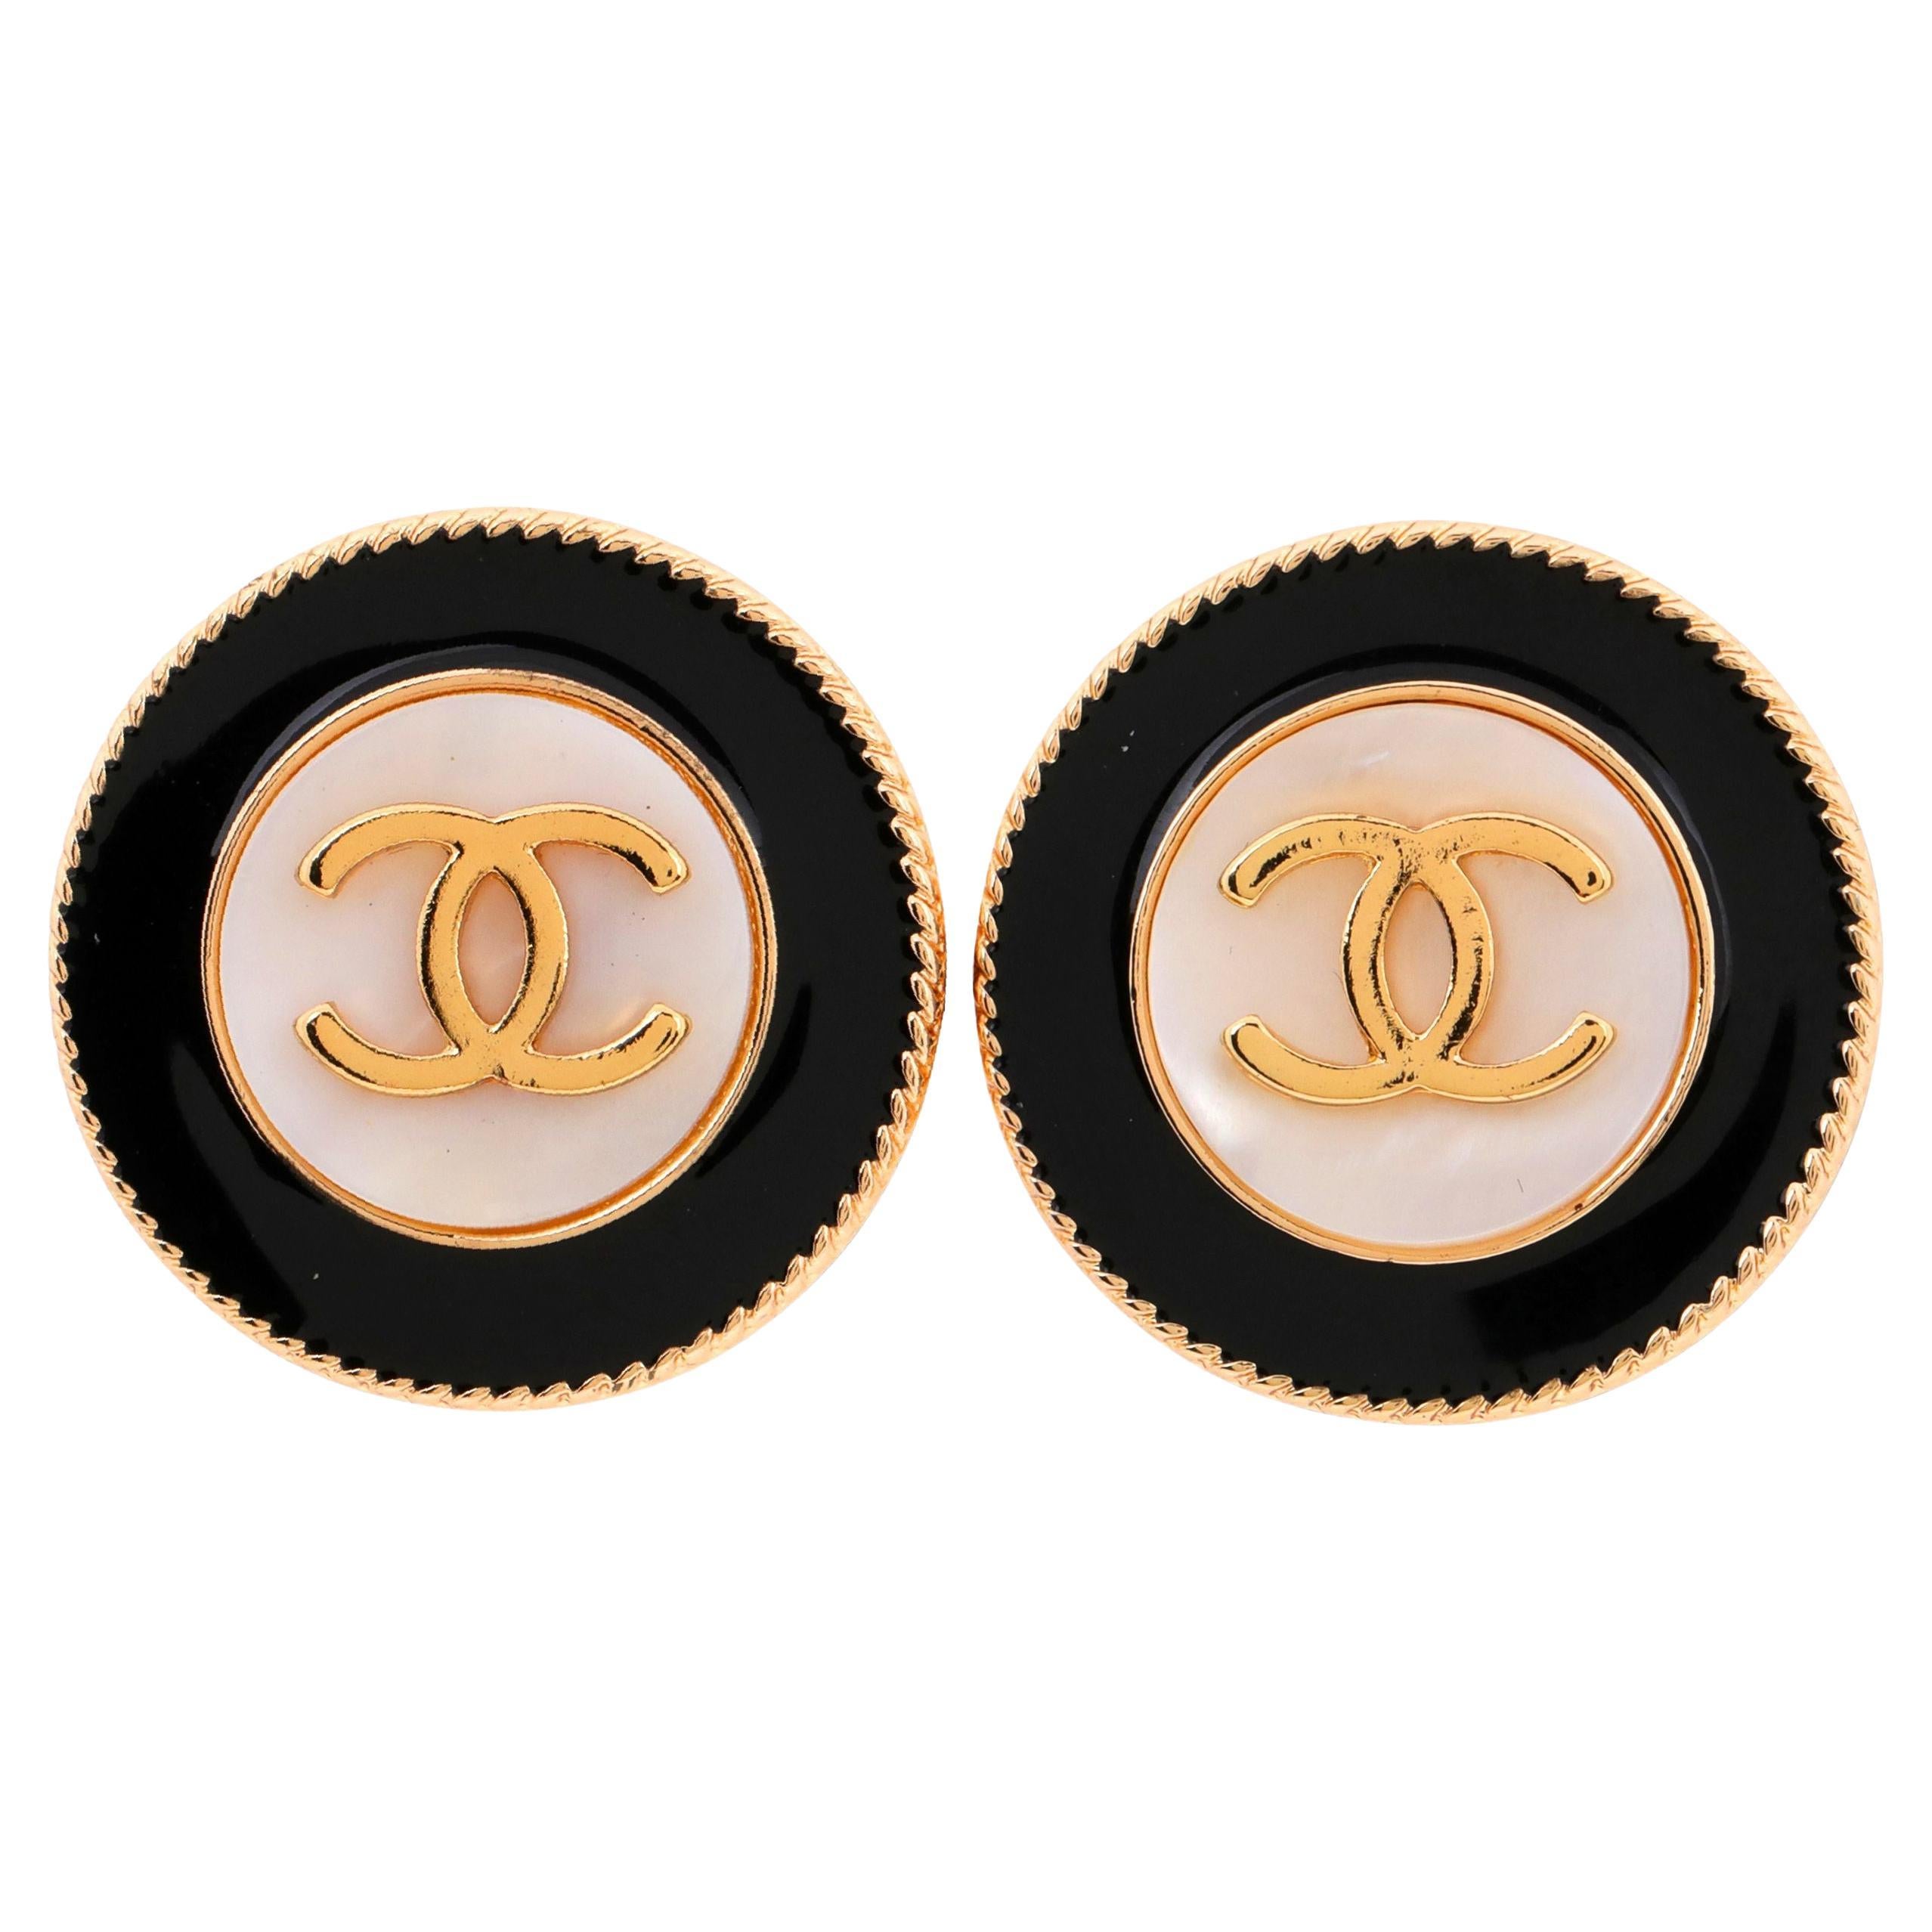 Chanel Black and White Pearlized CC Pierced Earrings